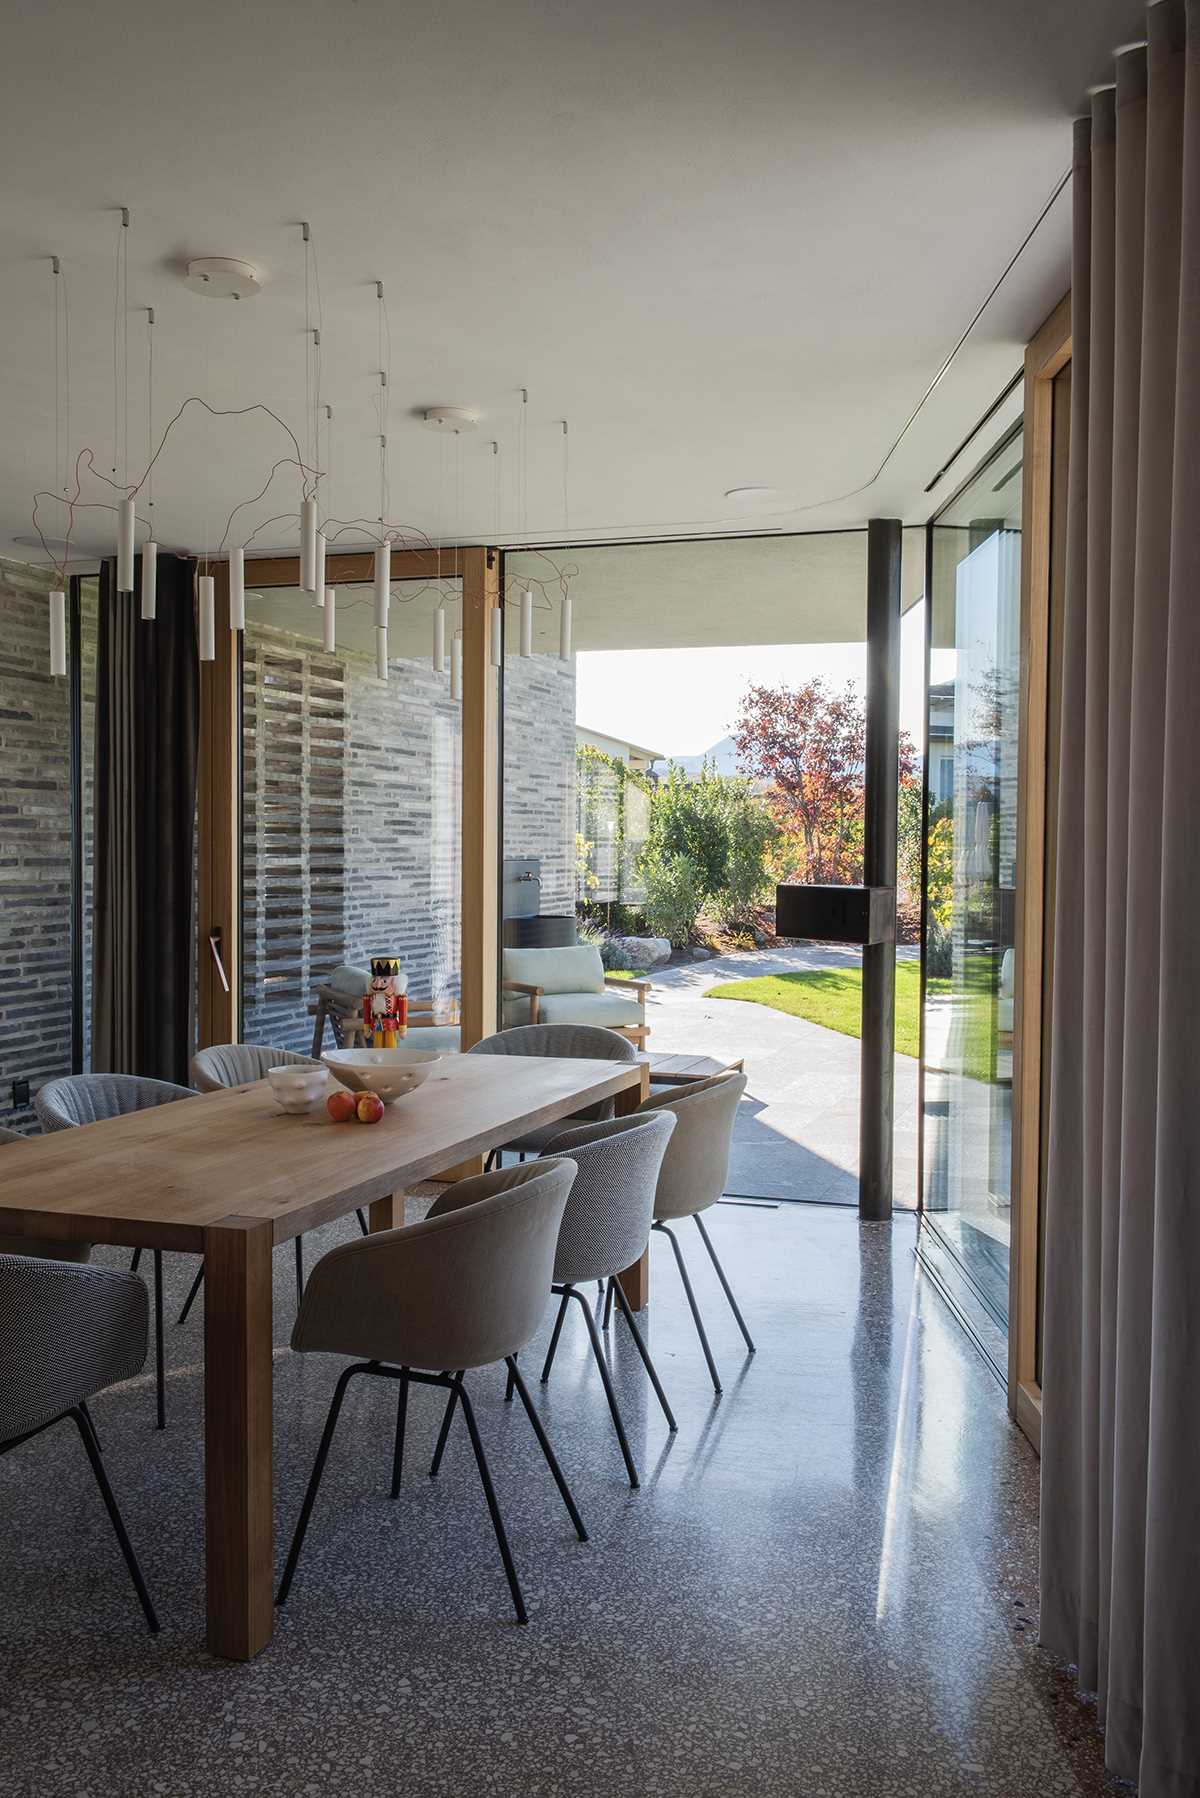 A wood-framed door connects the dining room with the outdoor space.